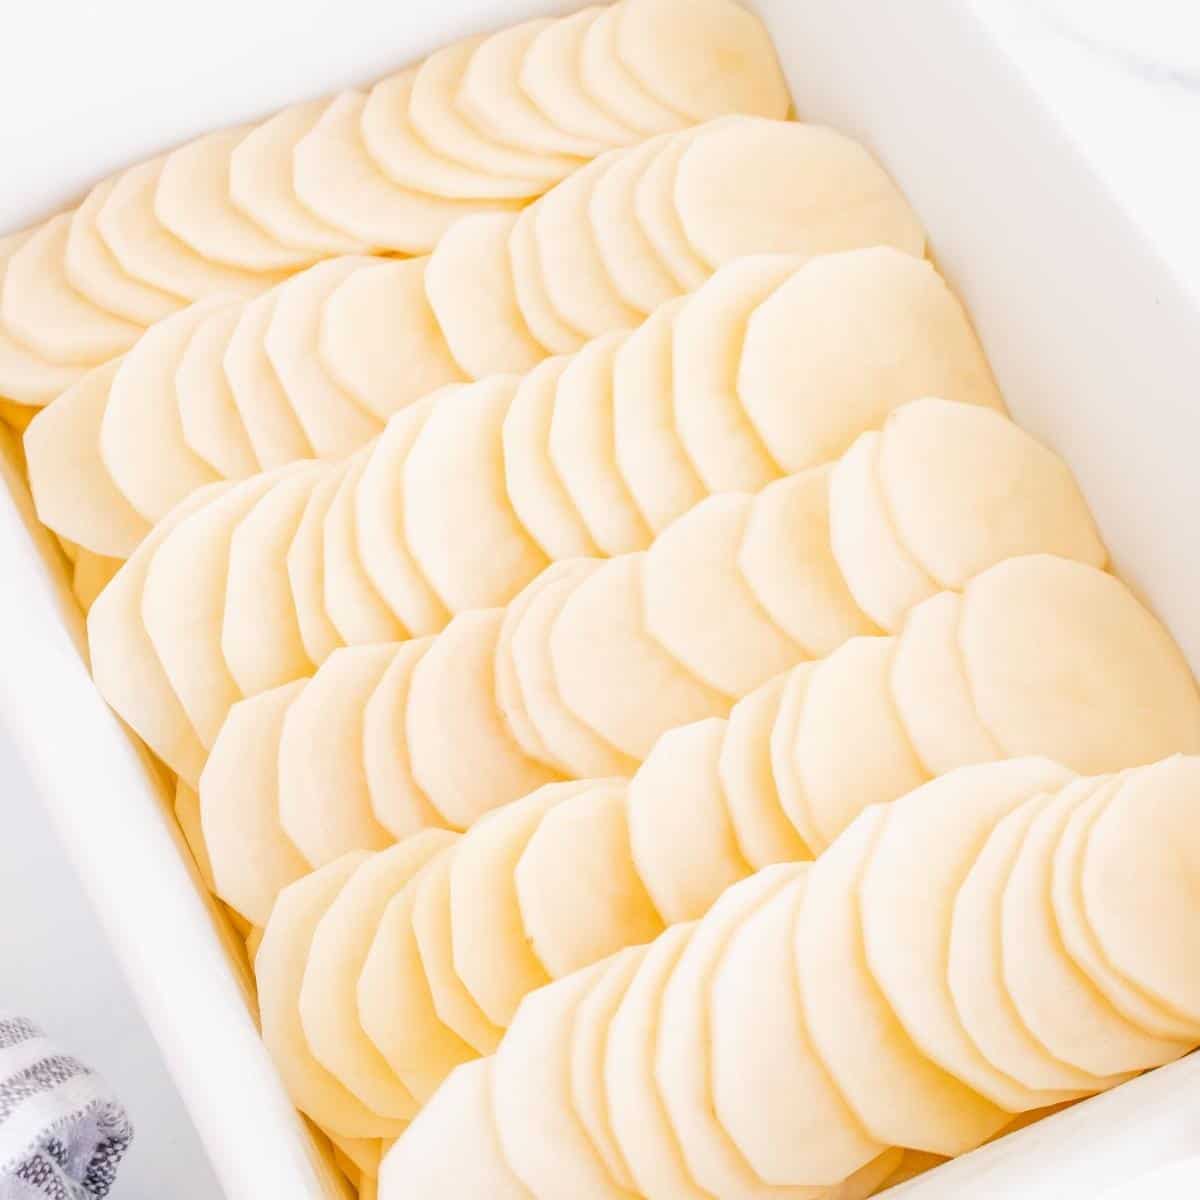 Russet potatoes that have been washed, peeled and sliced thinly and placed in a white casserole dish.